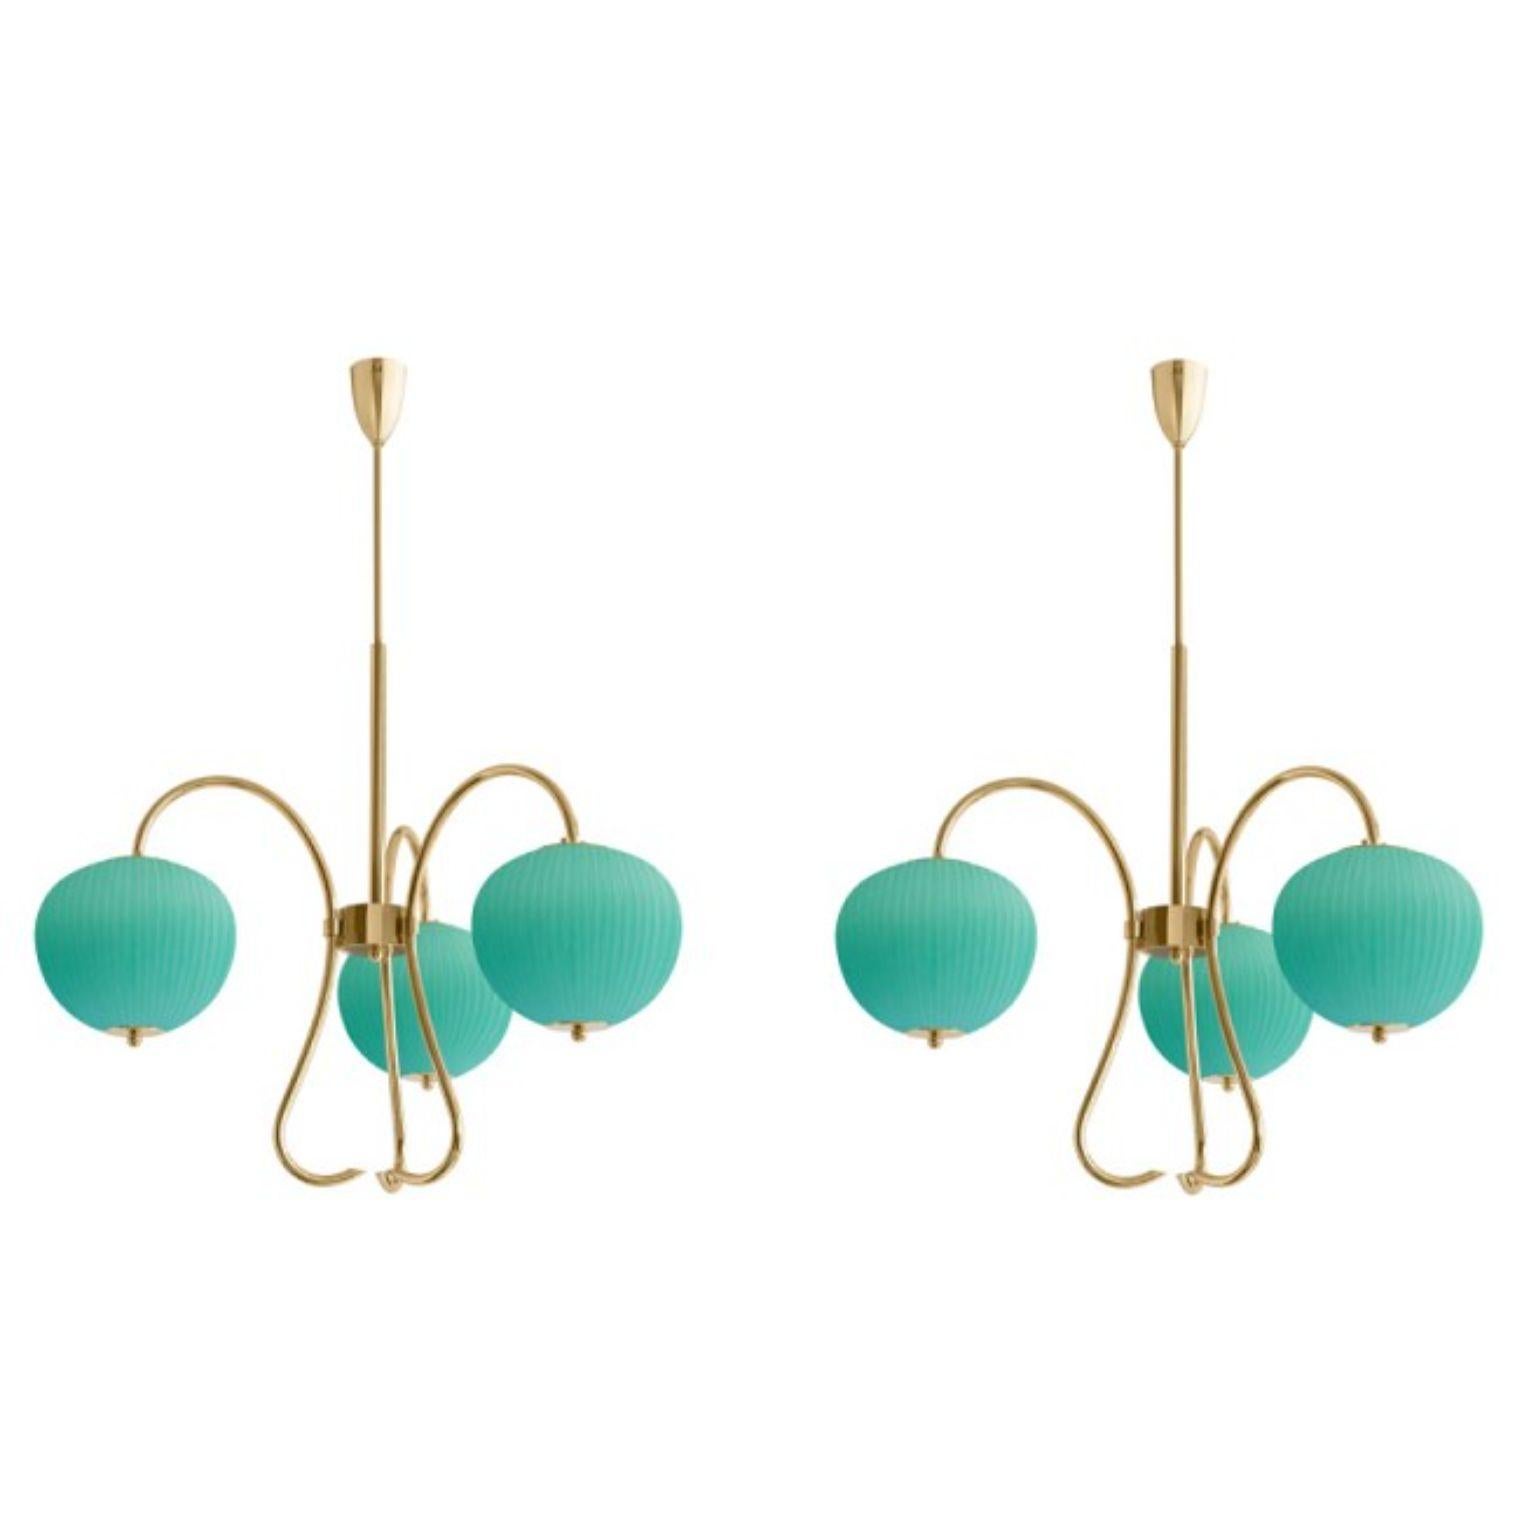 Triple chandelier China 03 by Magic Circus Editions
Dimensions: H 120 x W 81.5 x D 26.2 cm
Materials: brass, mouth blown glass sculpted with a diamond saw
Colour: jade green

Available finishes: Brass, nickel
Available colours: enamel soft white,